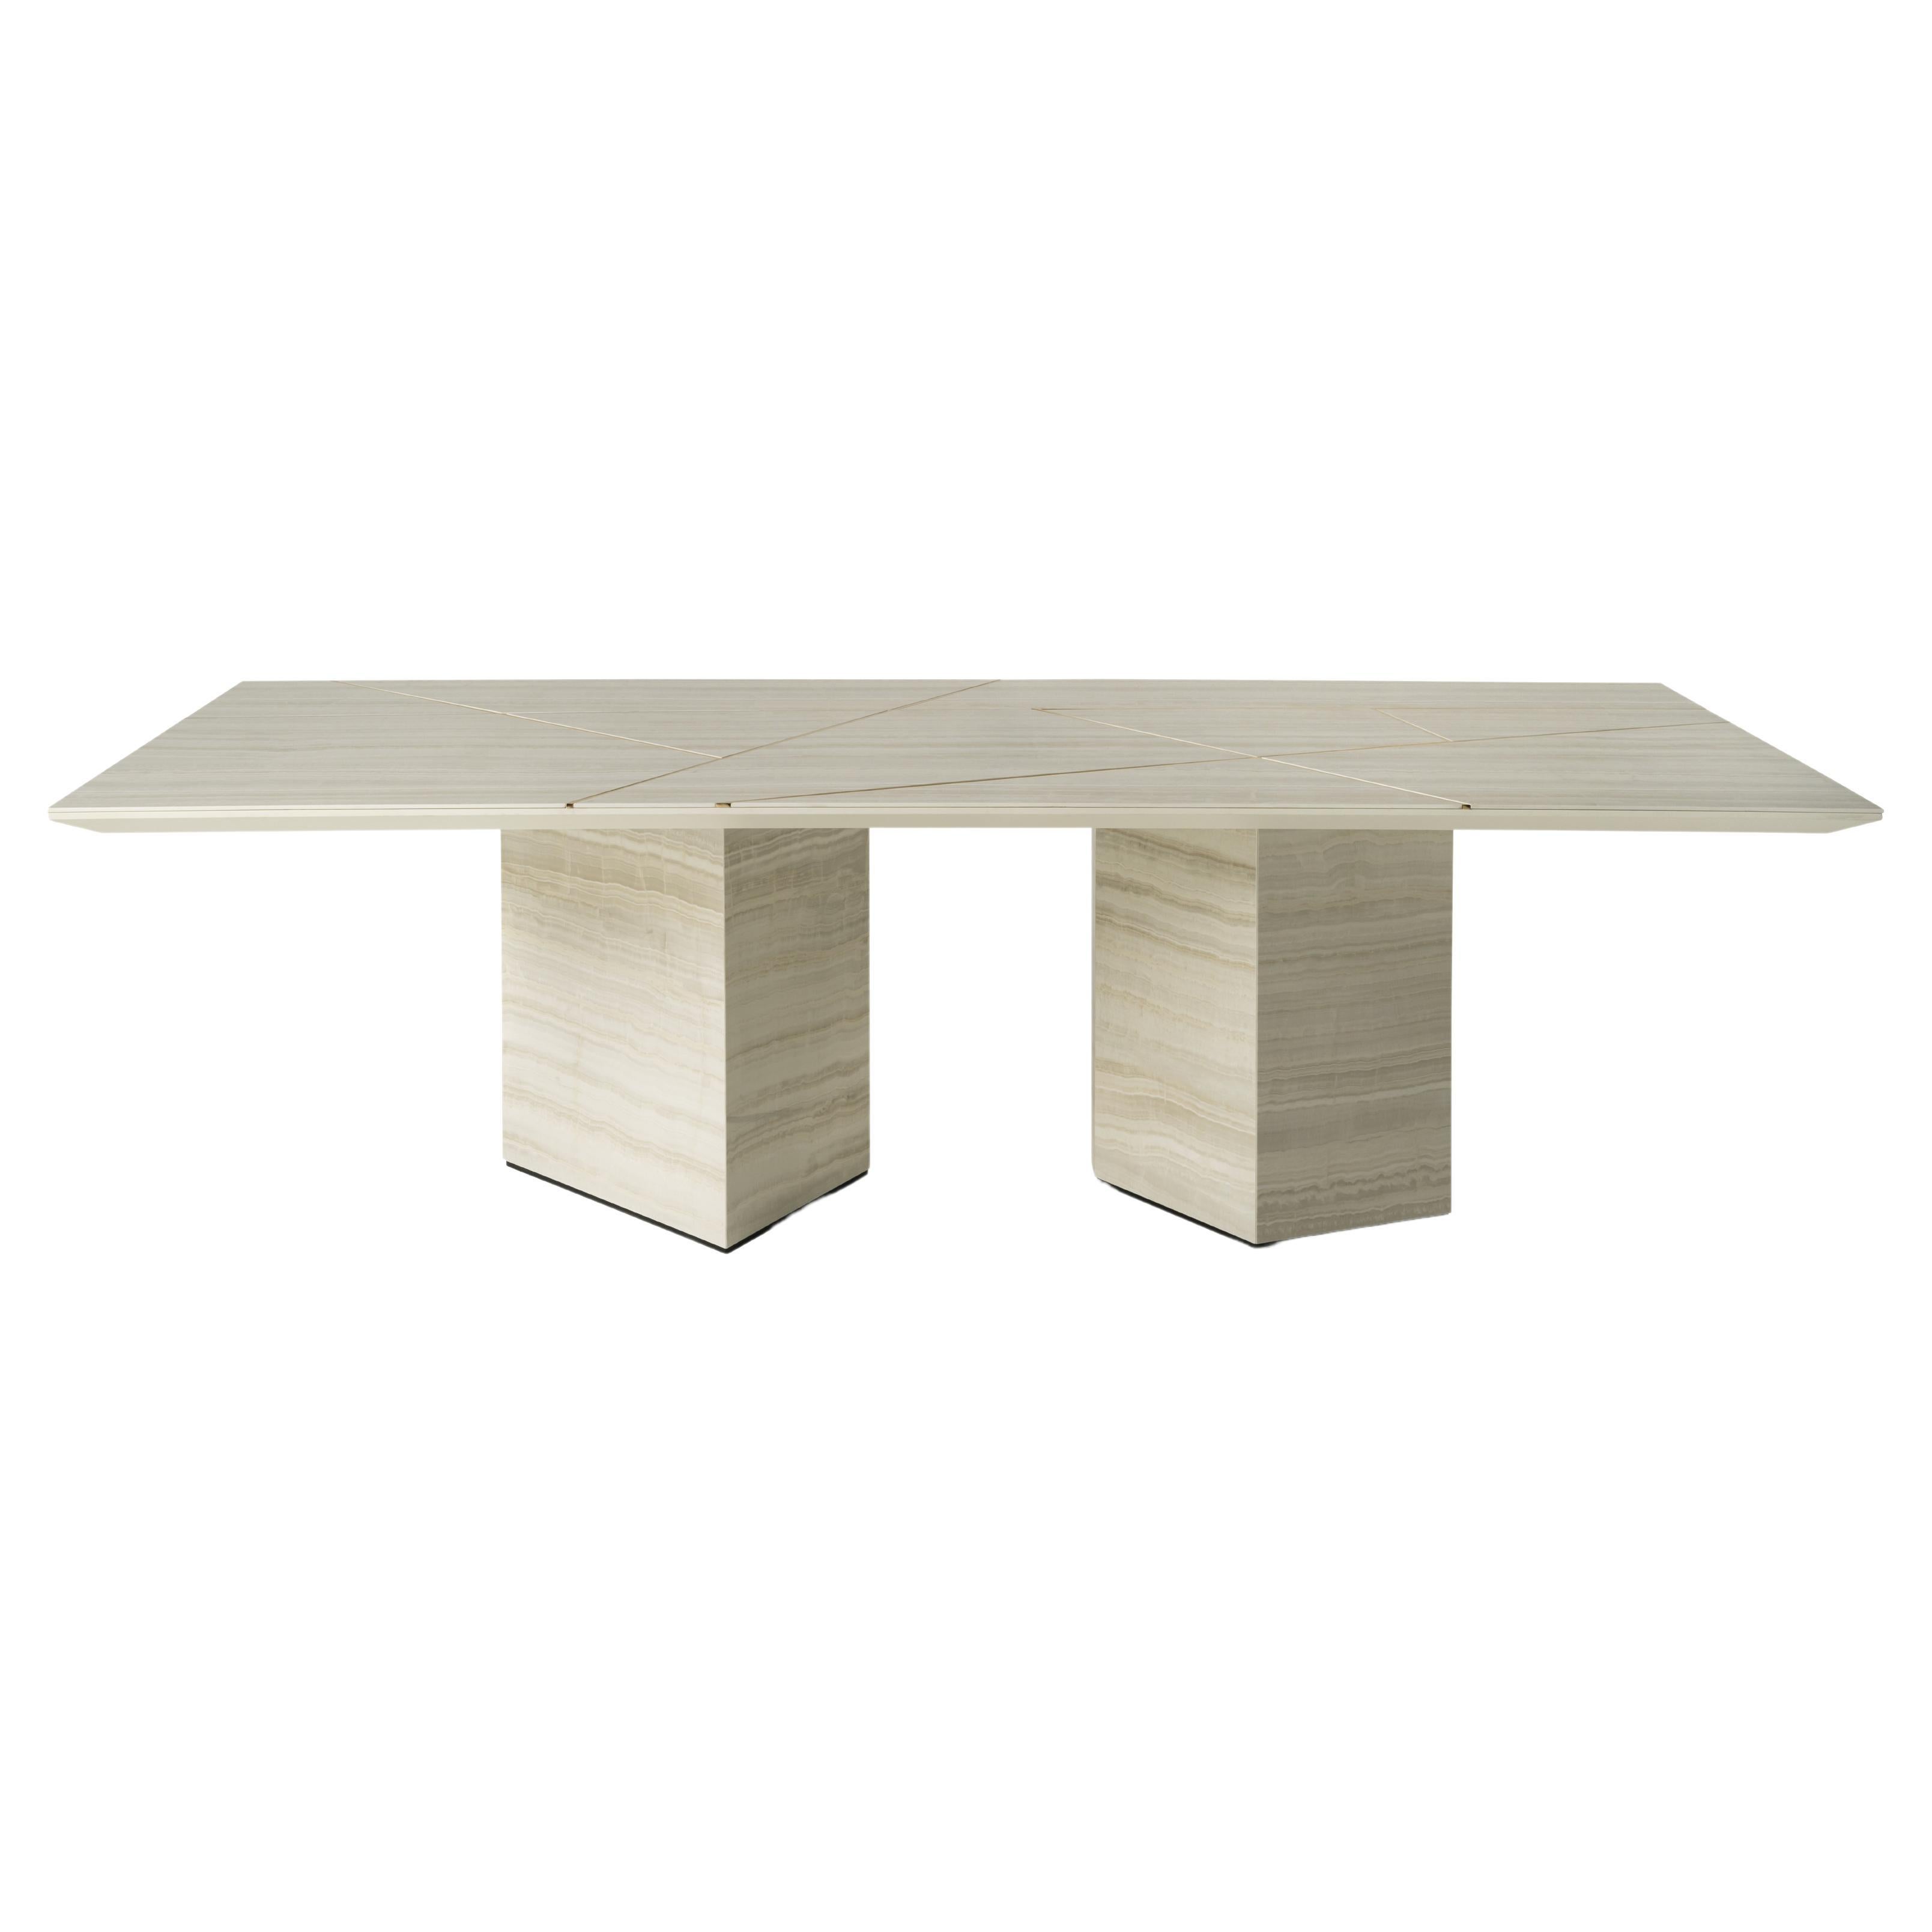 21st Century Comore Dining Table in Gres by Roberto Cavalli Home Interiors